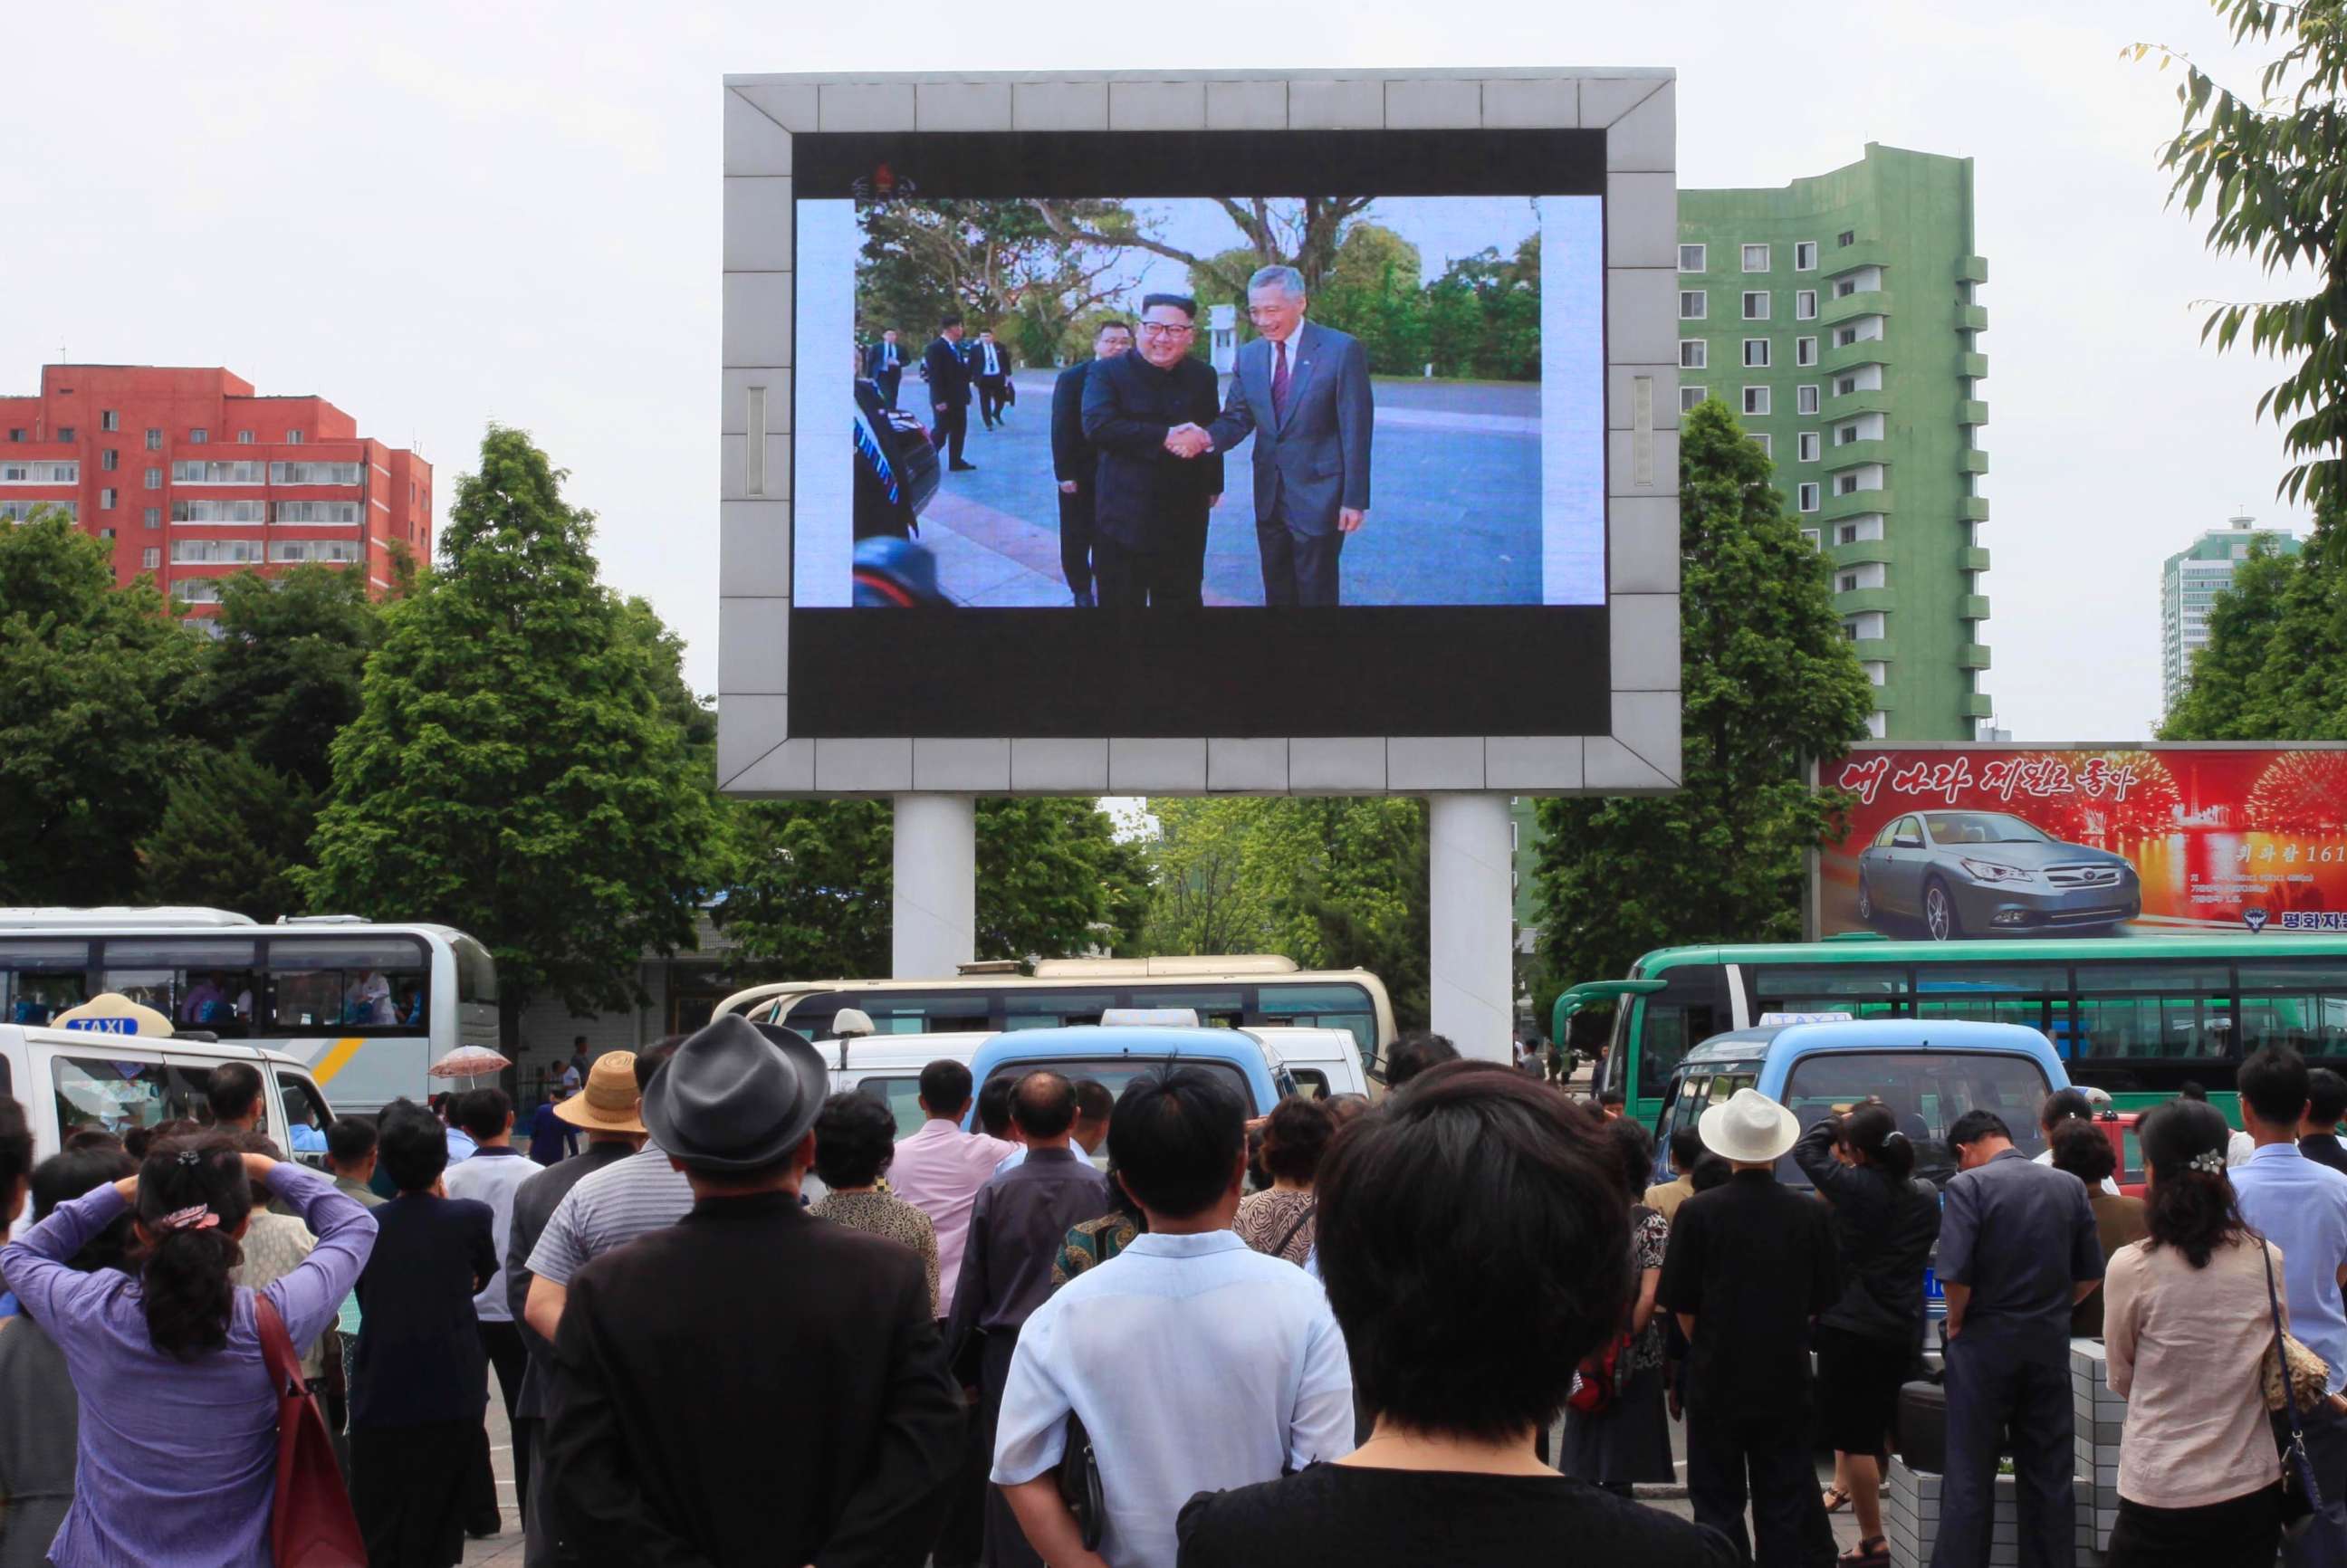 PHOTO: People watch a large screen at the main train station airing video of North Korean leader Kim Jong Un shaking hands with Singapore Prime Minister Lee Hsien Loong during his trip to Singapore in Pyongyang, North Korea, June 11, 2018.